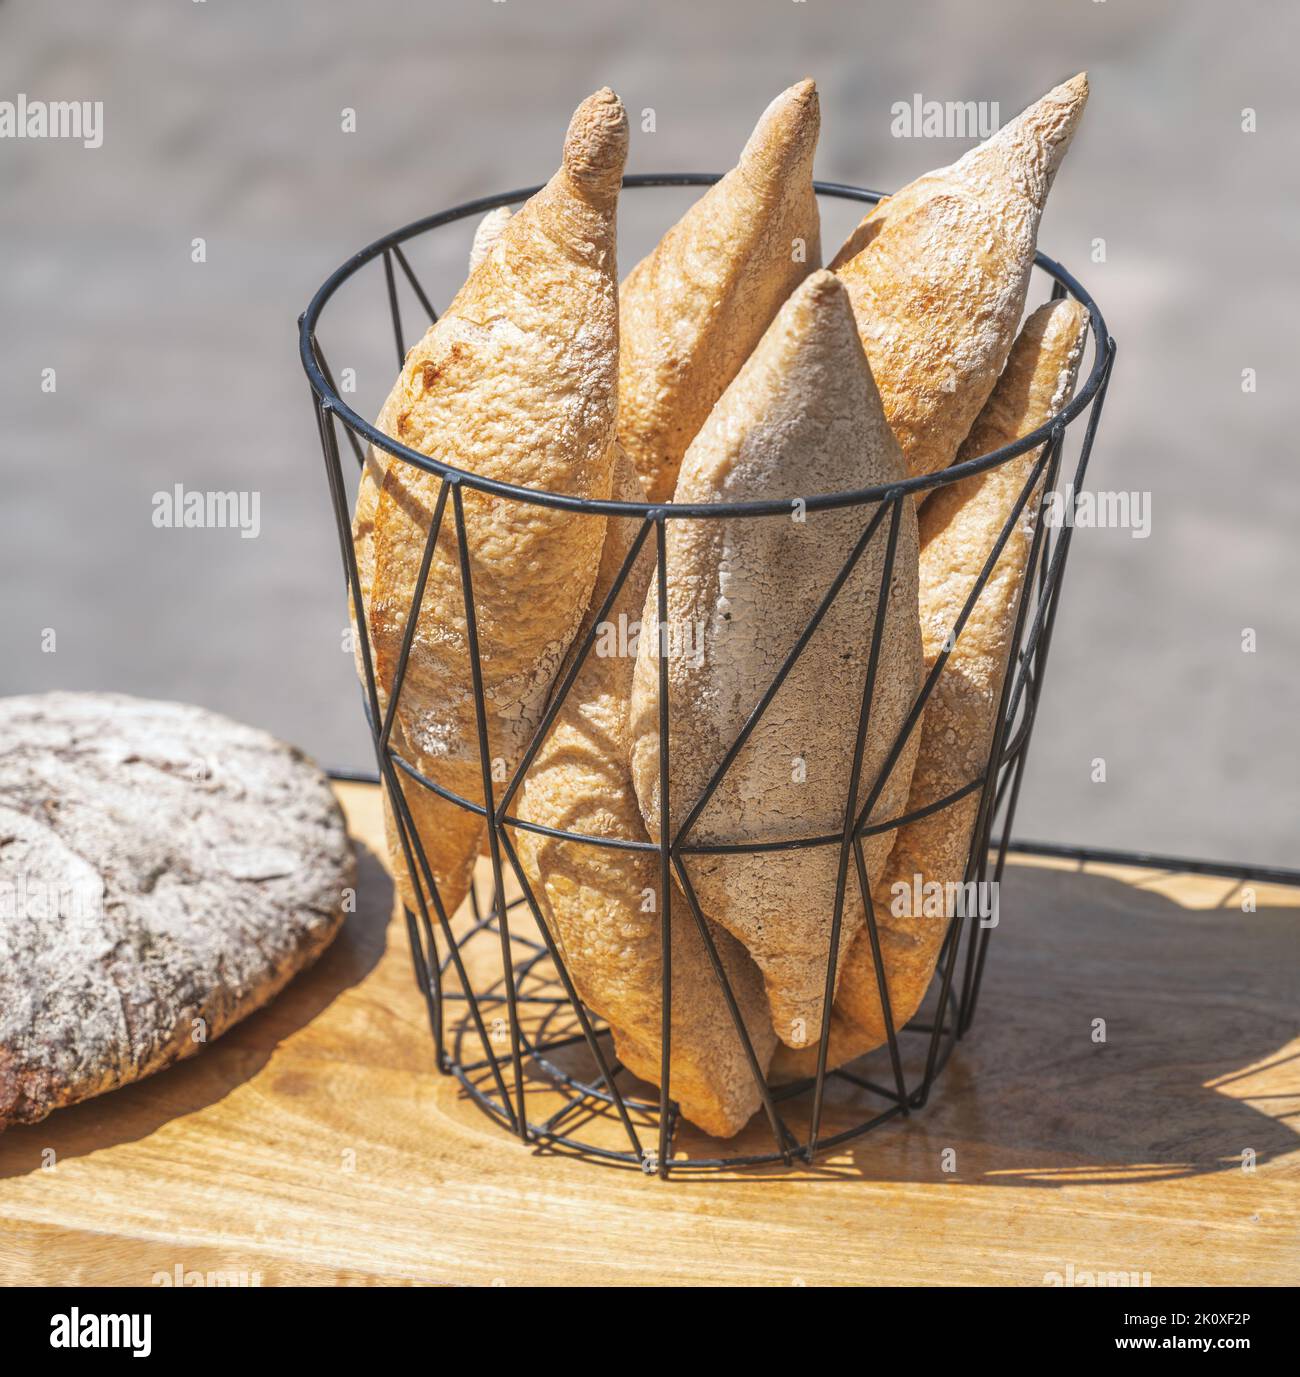 Breadbasket with crispy white bread on the table of a restaurant Stock Photo